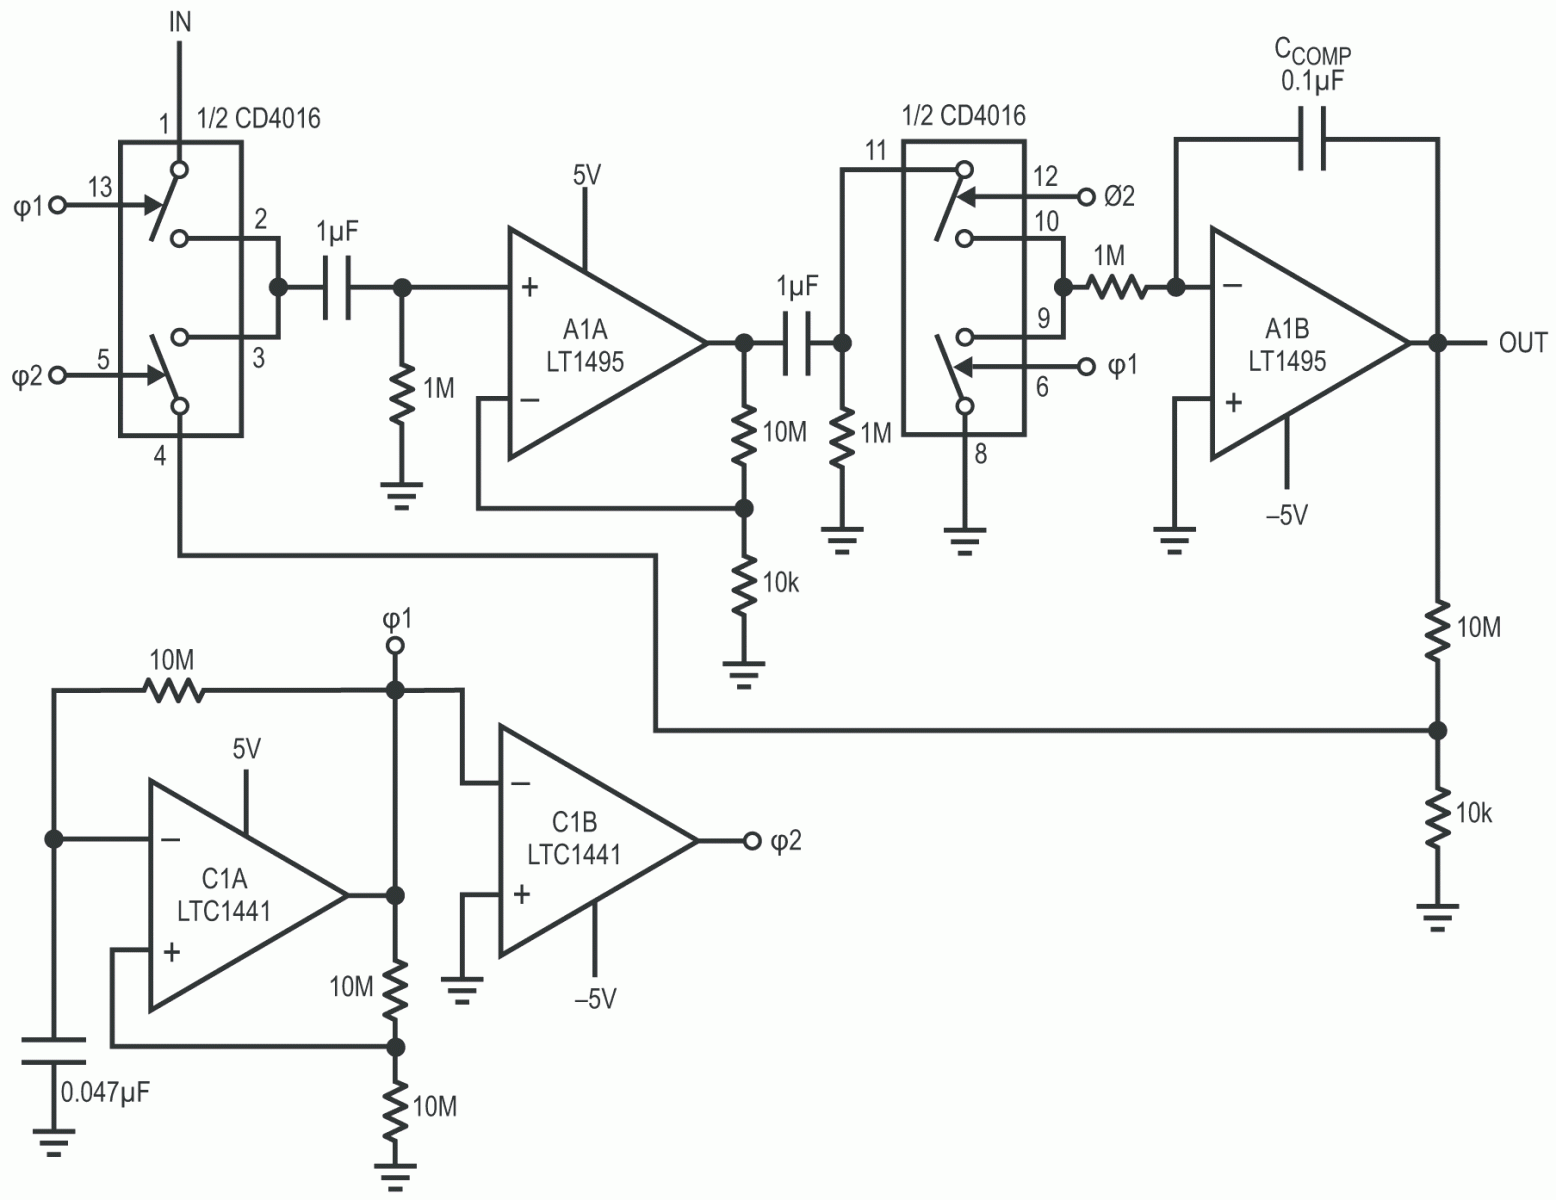 0.05 µV/°C chopped amplifier requires only 5 µA supply current.